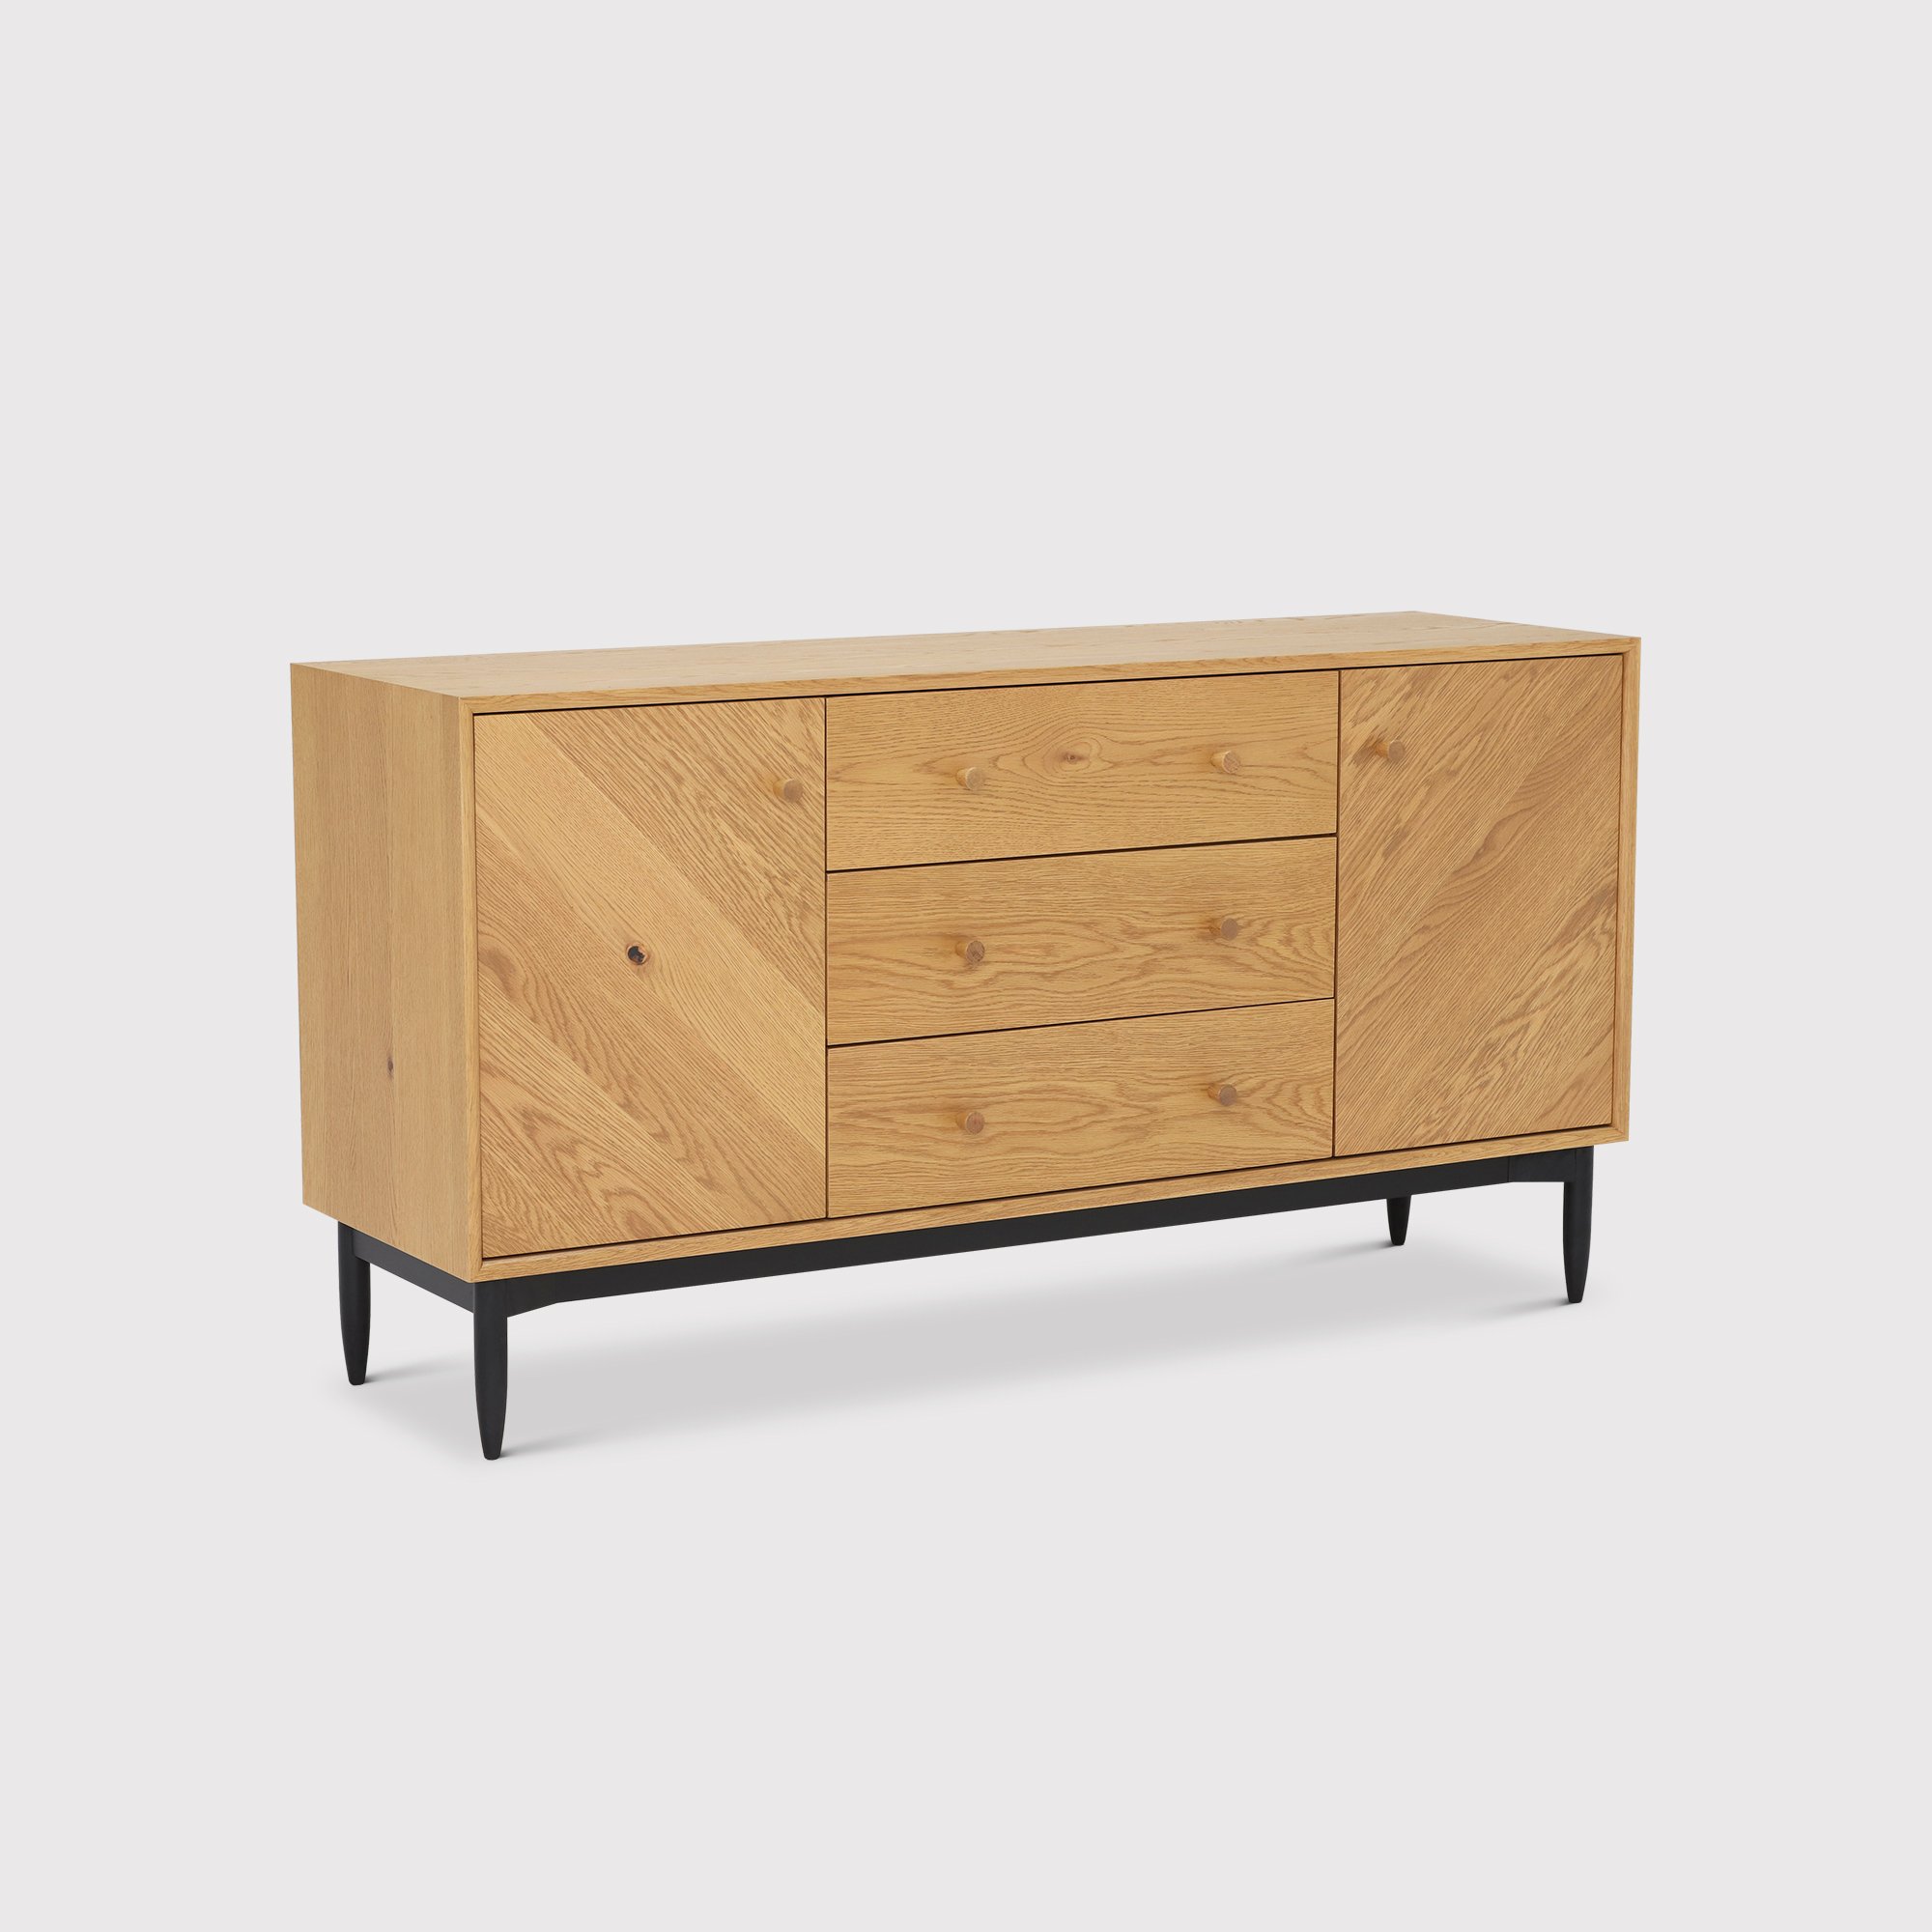 Ercol Monza Large Sideboard, Neutral | Barker & Stonehouse